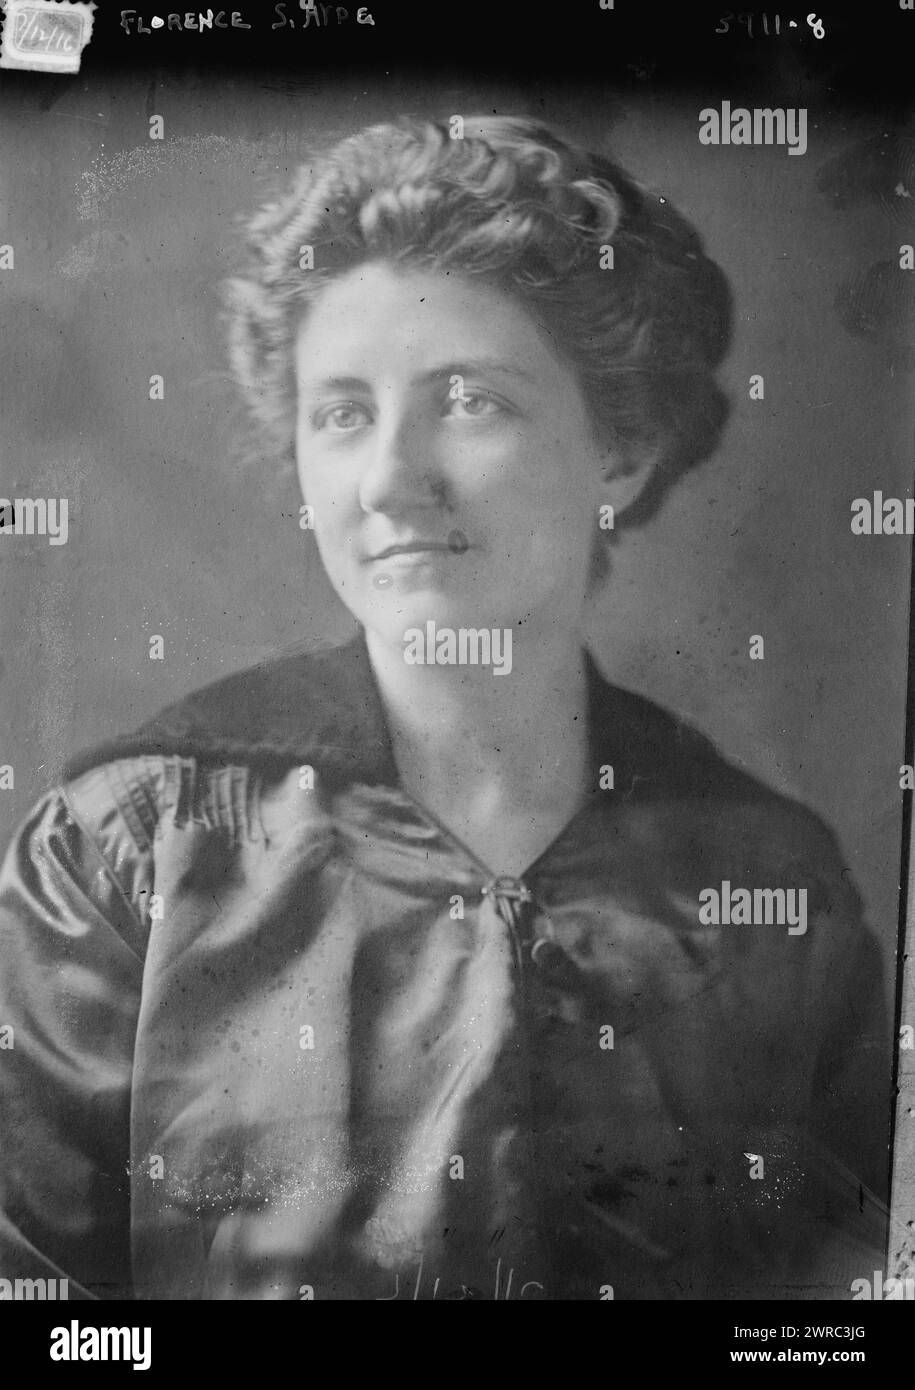 Florence S. Hyde, Photograph shows Florence S. Hyde who was secretary of the National Woman's Prohibition Federation., between ca. 1915 and ca. 1920, Glass negatives, 1 negative: glass Stock Photo